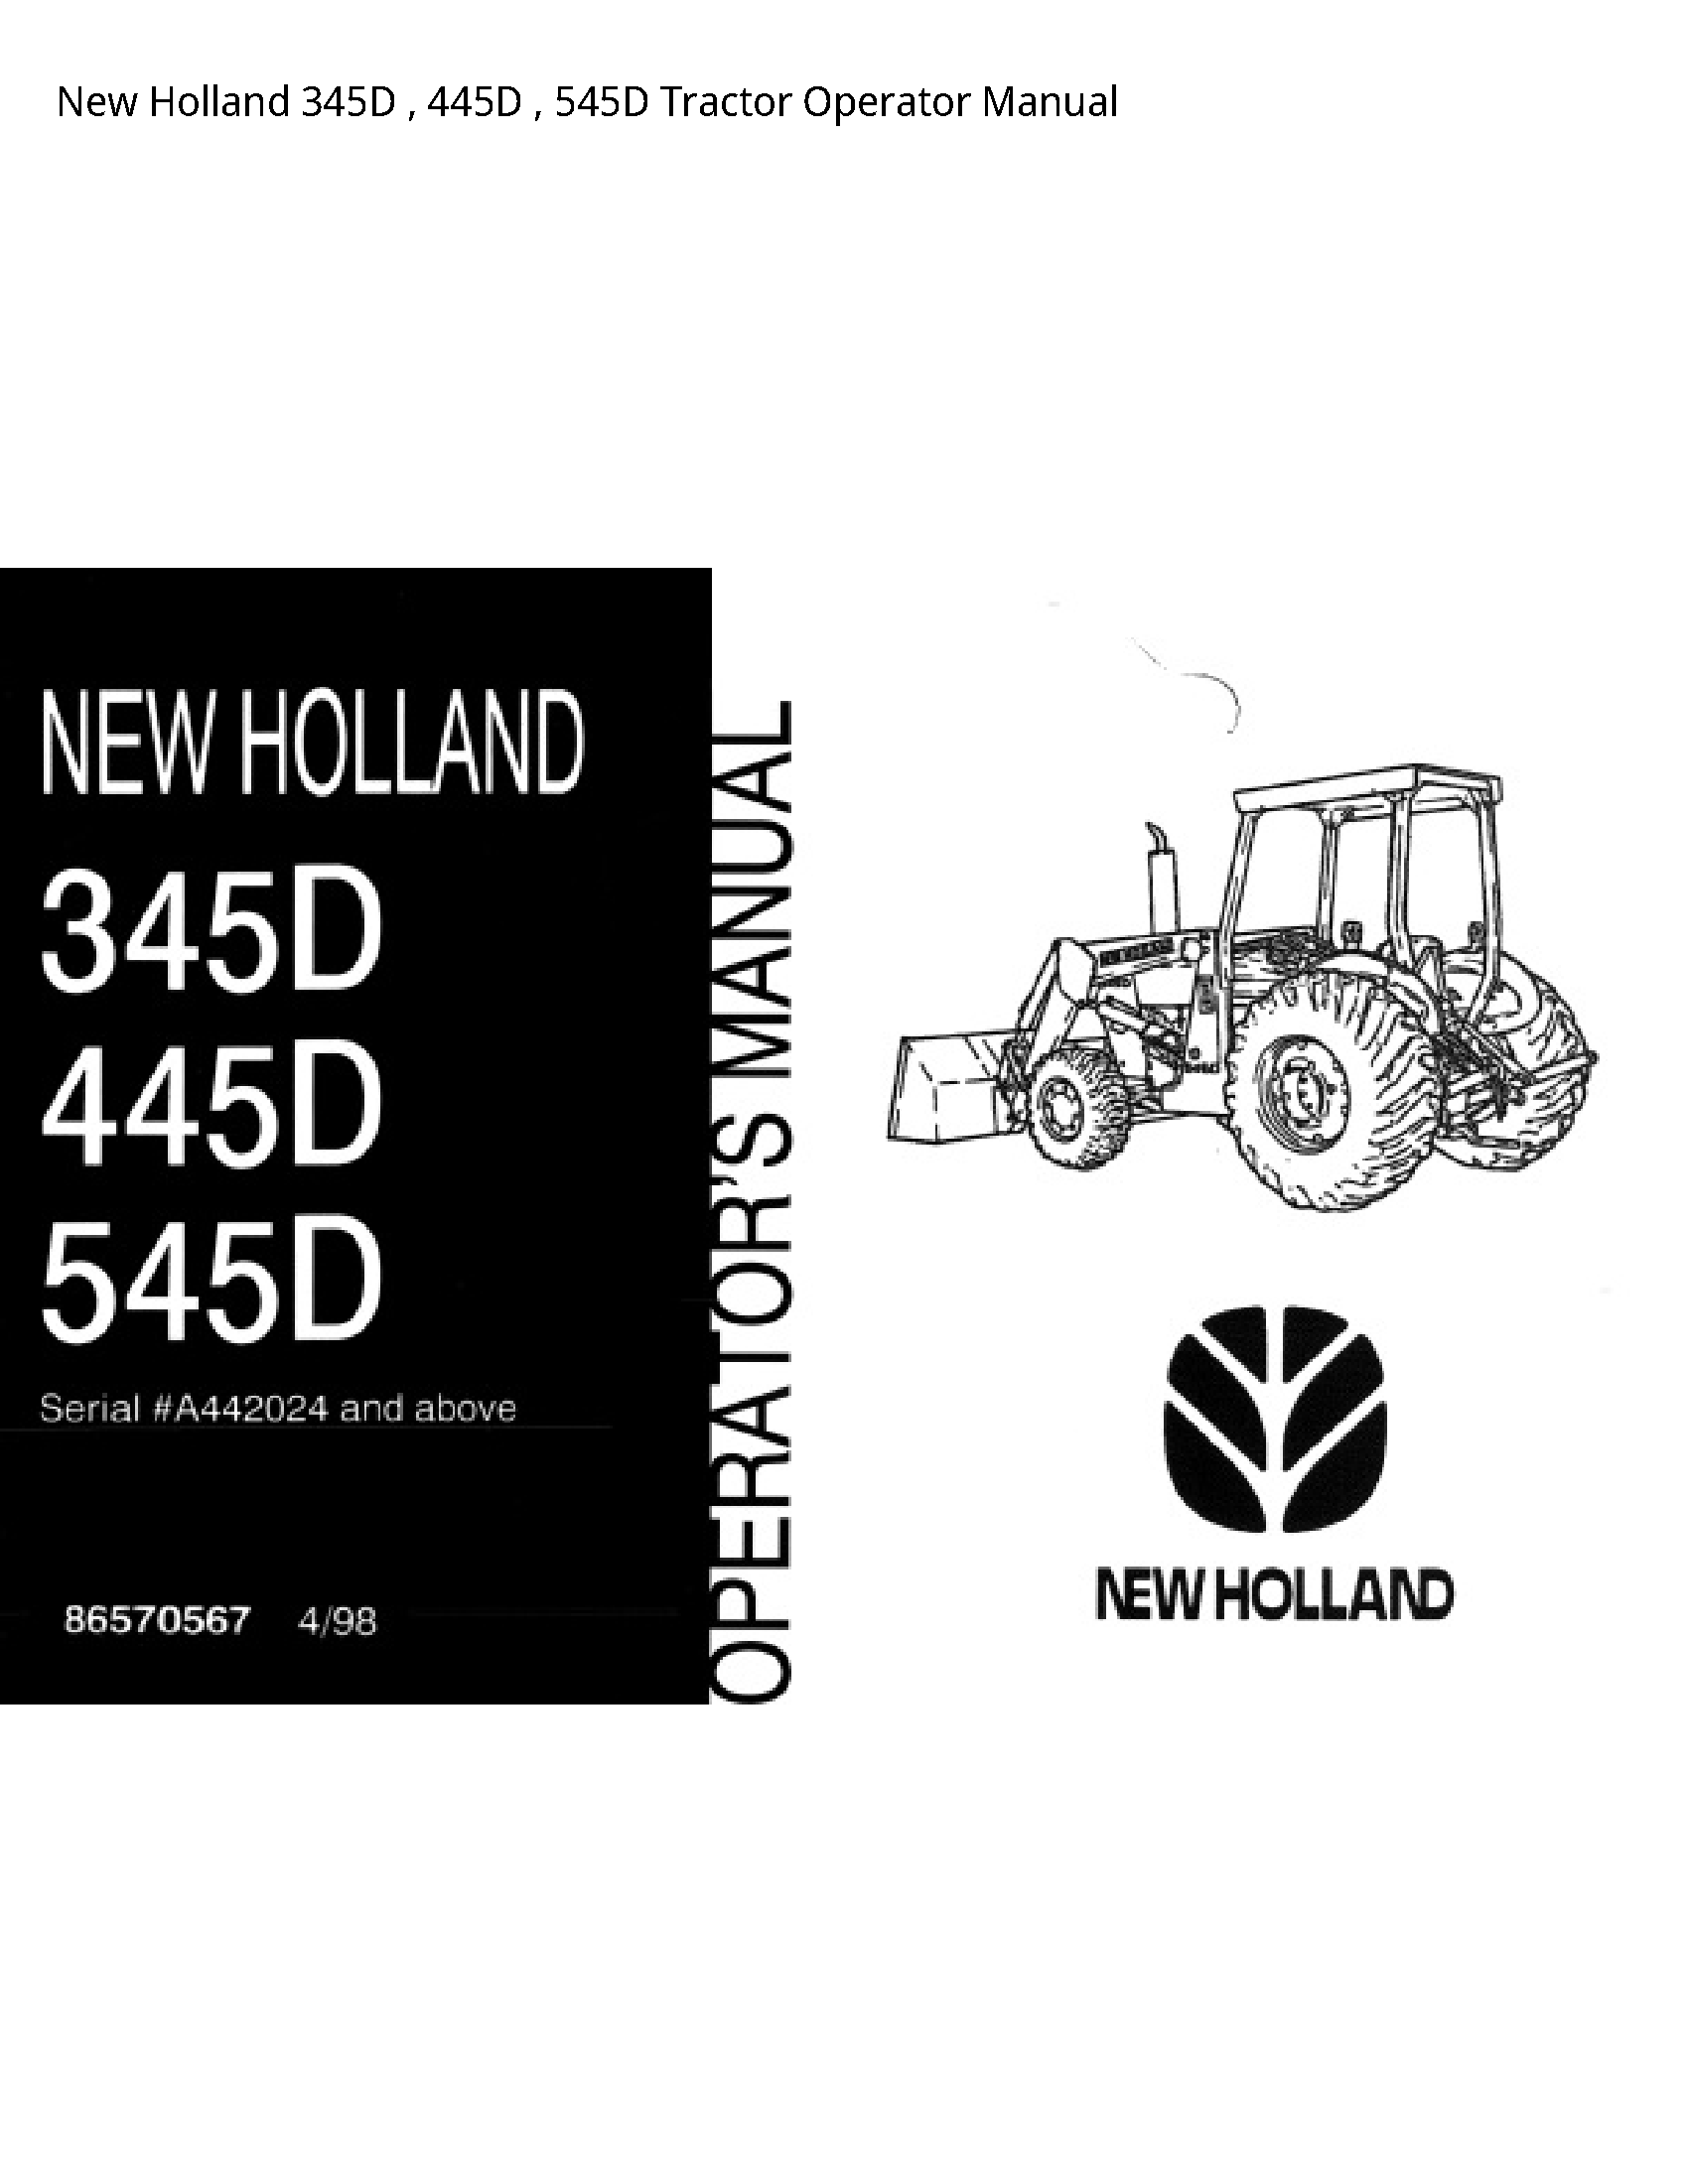 New Holland 345D Tractor Operator manual